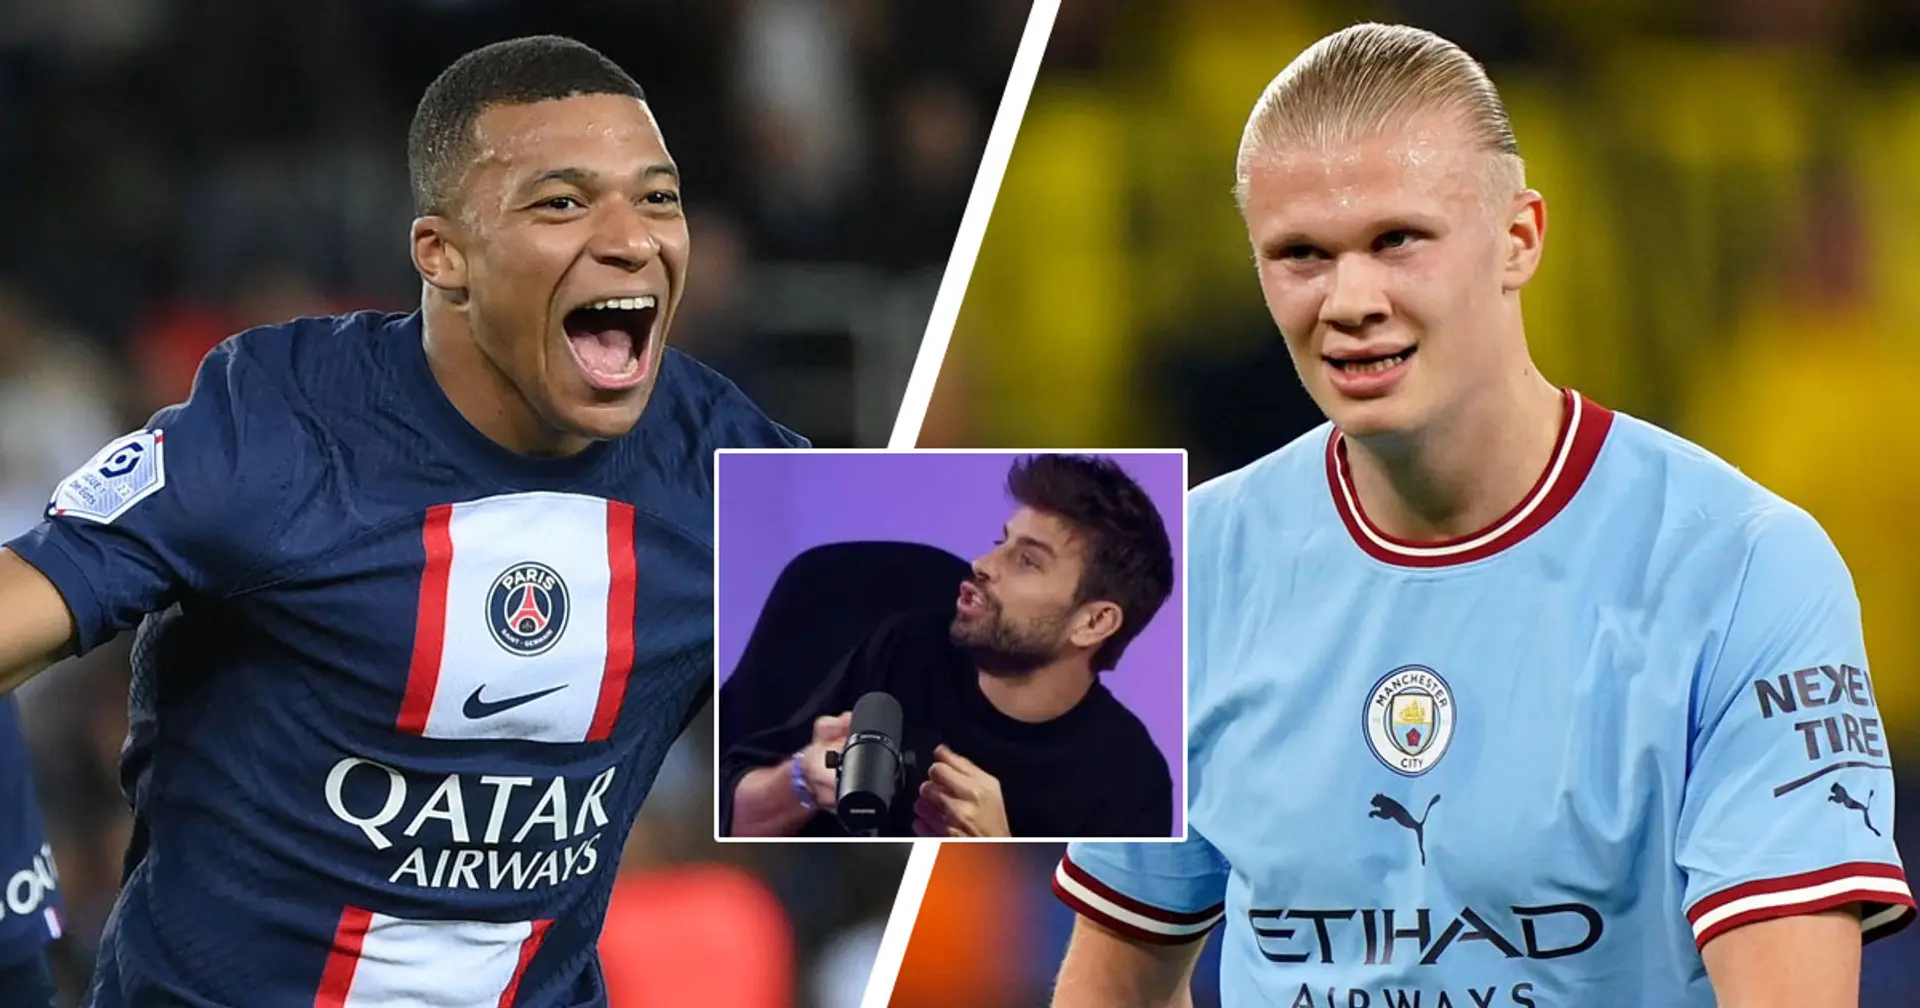 'Imagine Mbappe and Haaland playing one on one': Pique suggests radical changes for extra-time and penalties